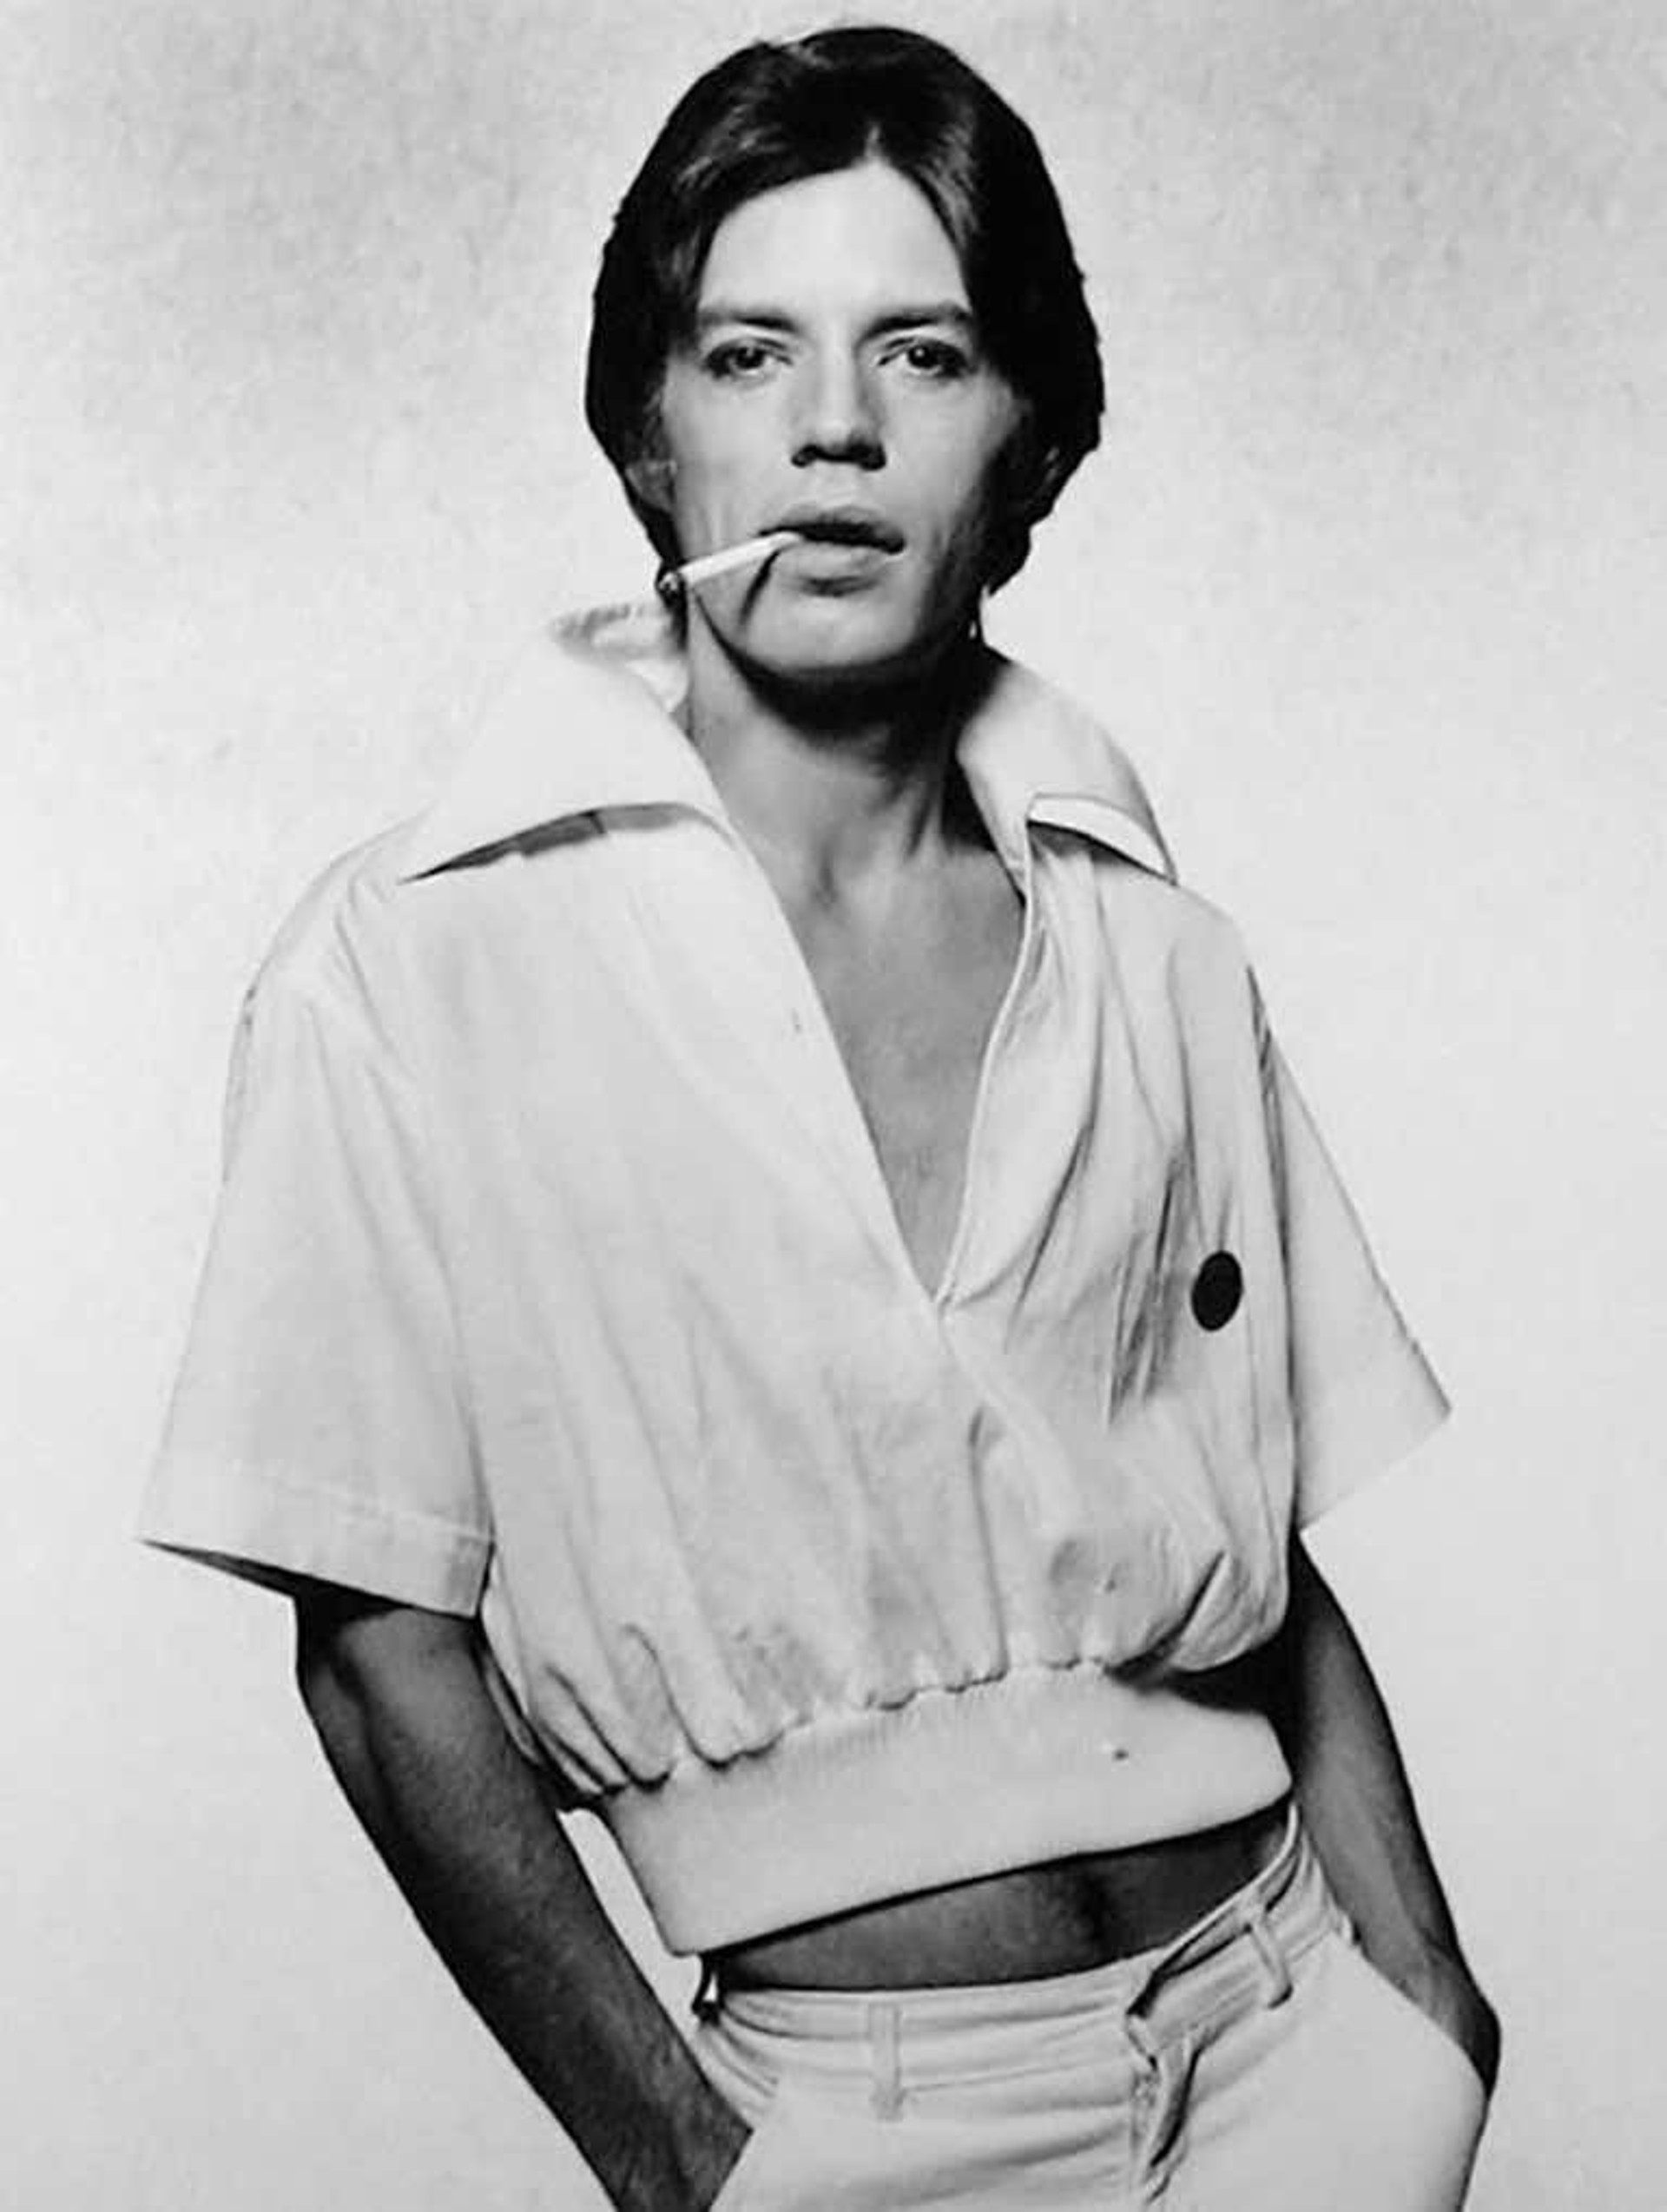 Mick Jagger, Cigarette by Terry O'Neill